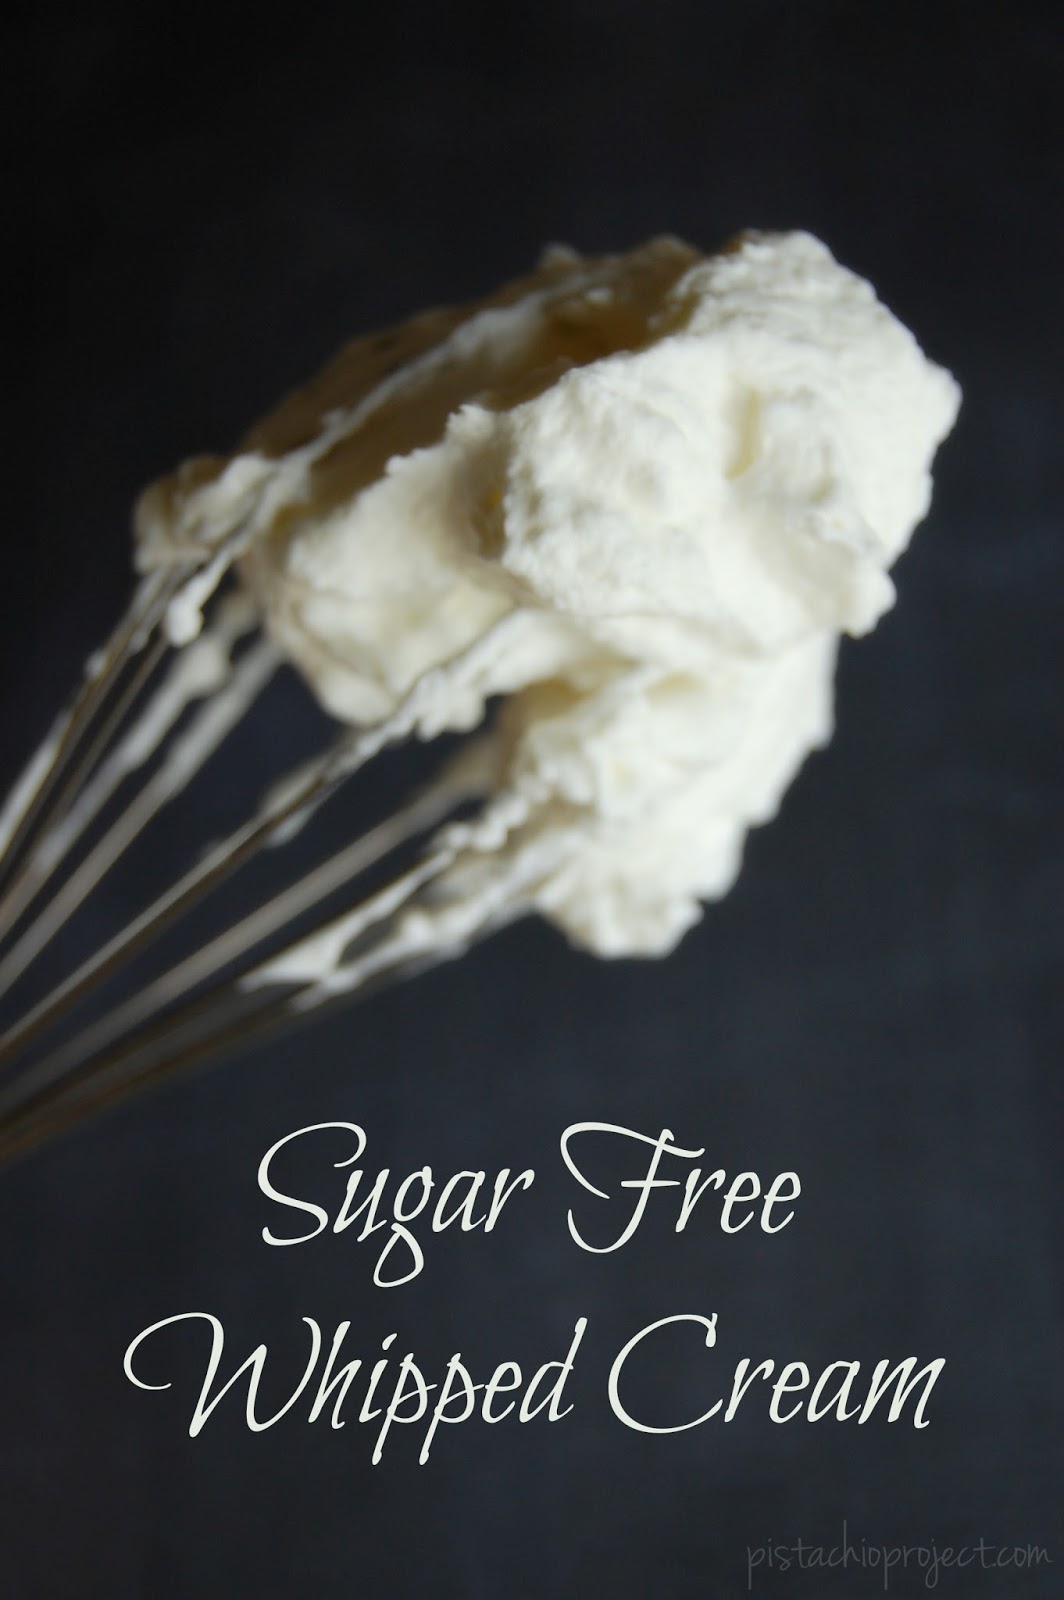 Sugar Free Whipped Cream - If you are in need of a delicious sugar free whipped cream then this is the whipped cream for you! No guilt as you pile on large scoops of whipped cream on to that yummy dessert!